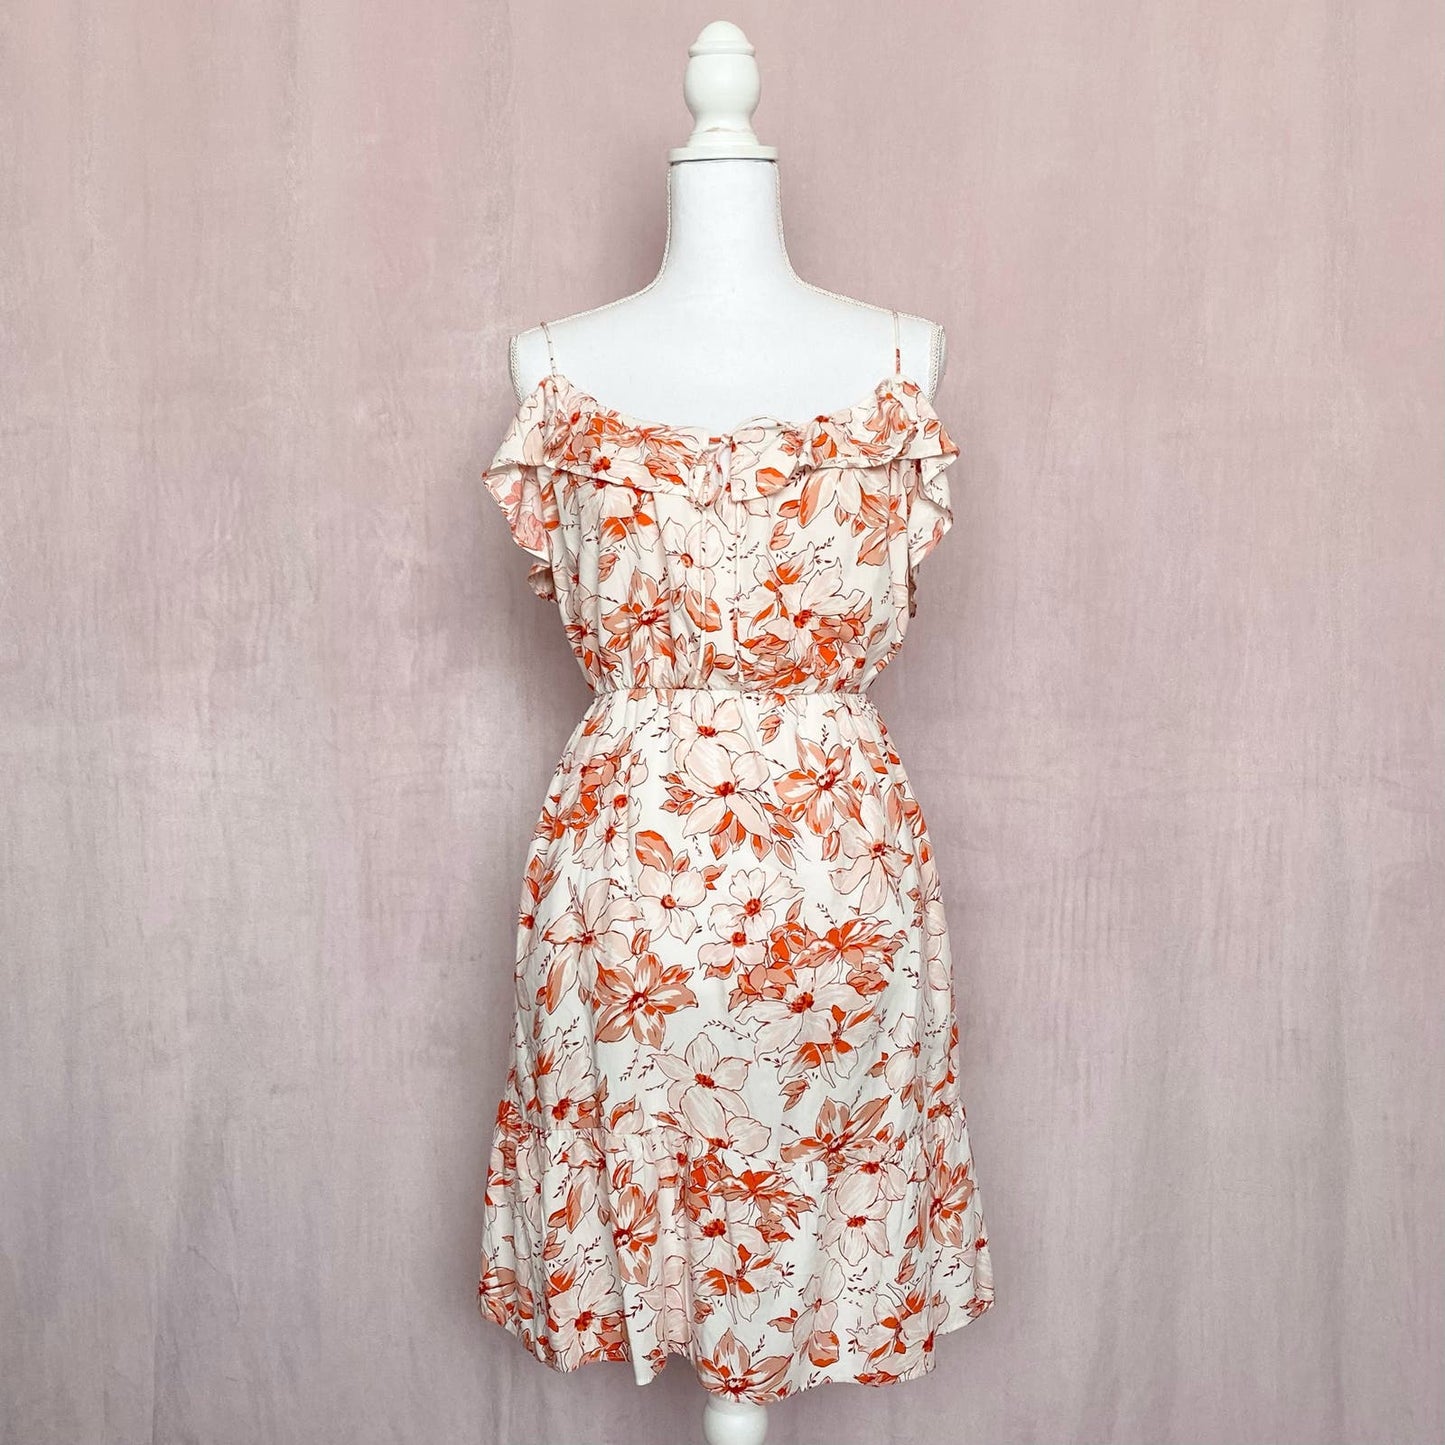 Secondhand J.Crew Tiered Mini Dress in Breezy Blooms, Size XL